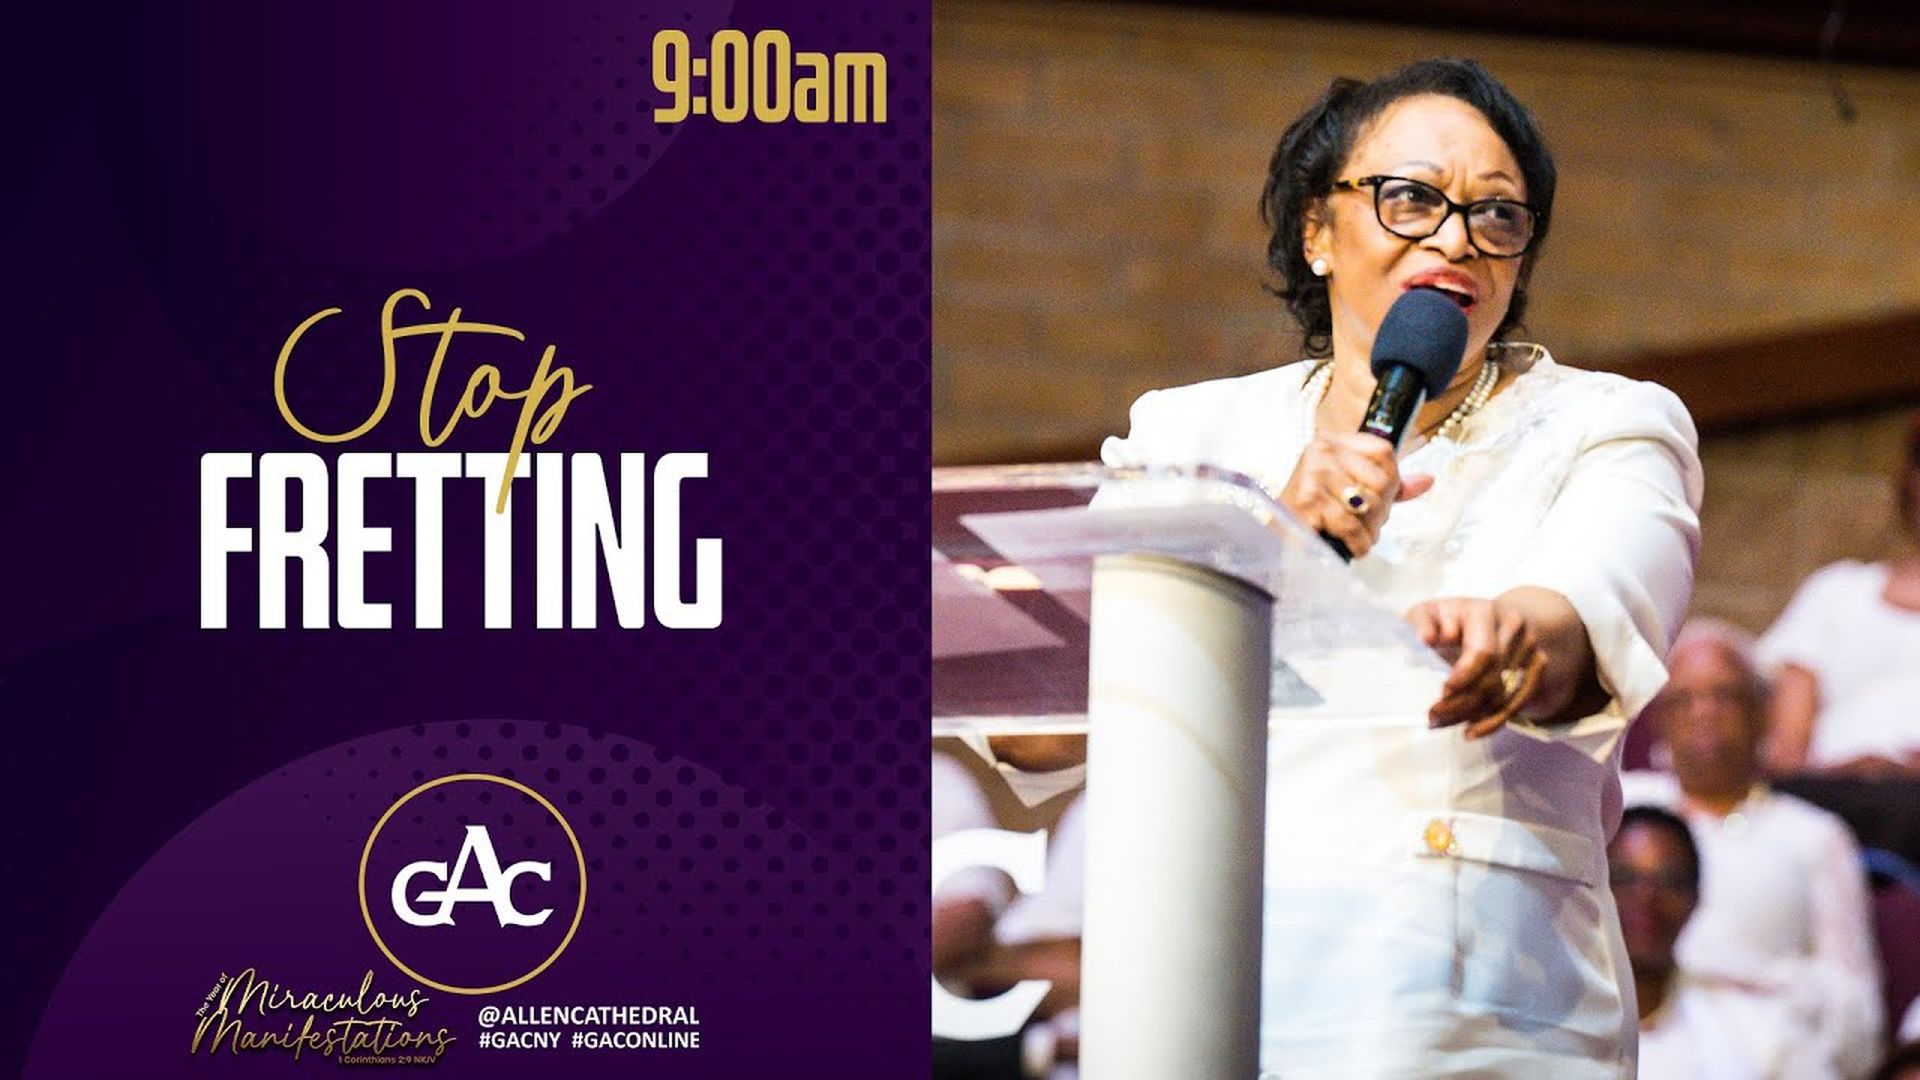 STOP FRETTING - Bishop Jacqueline McCullough - Allen Worship Experience 